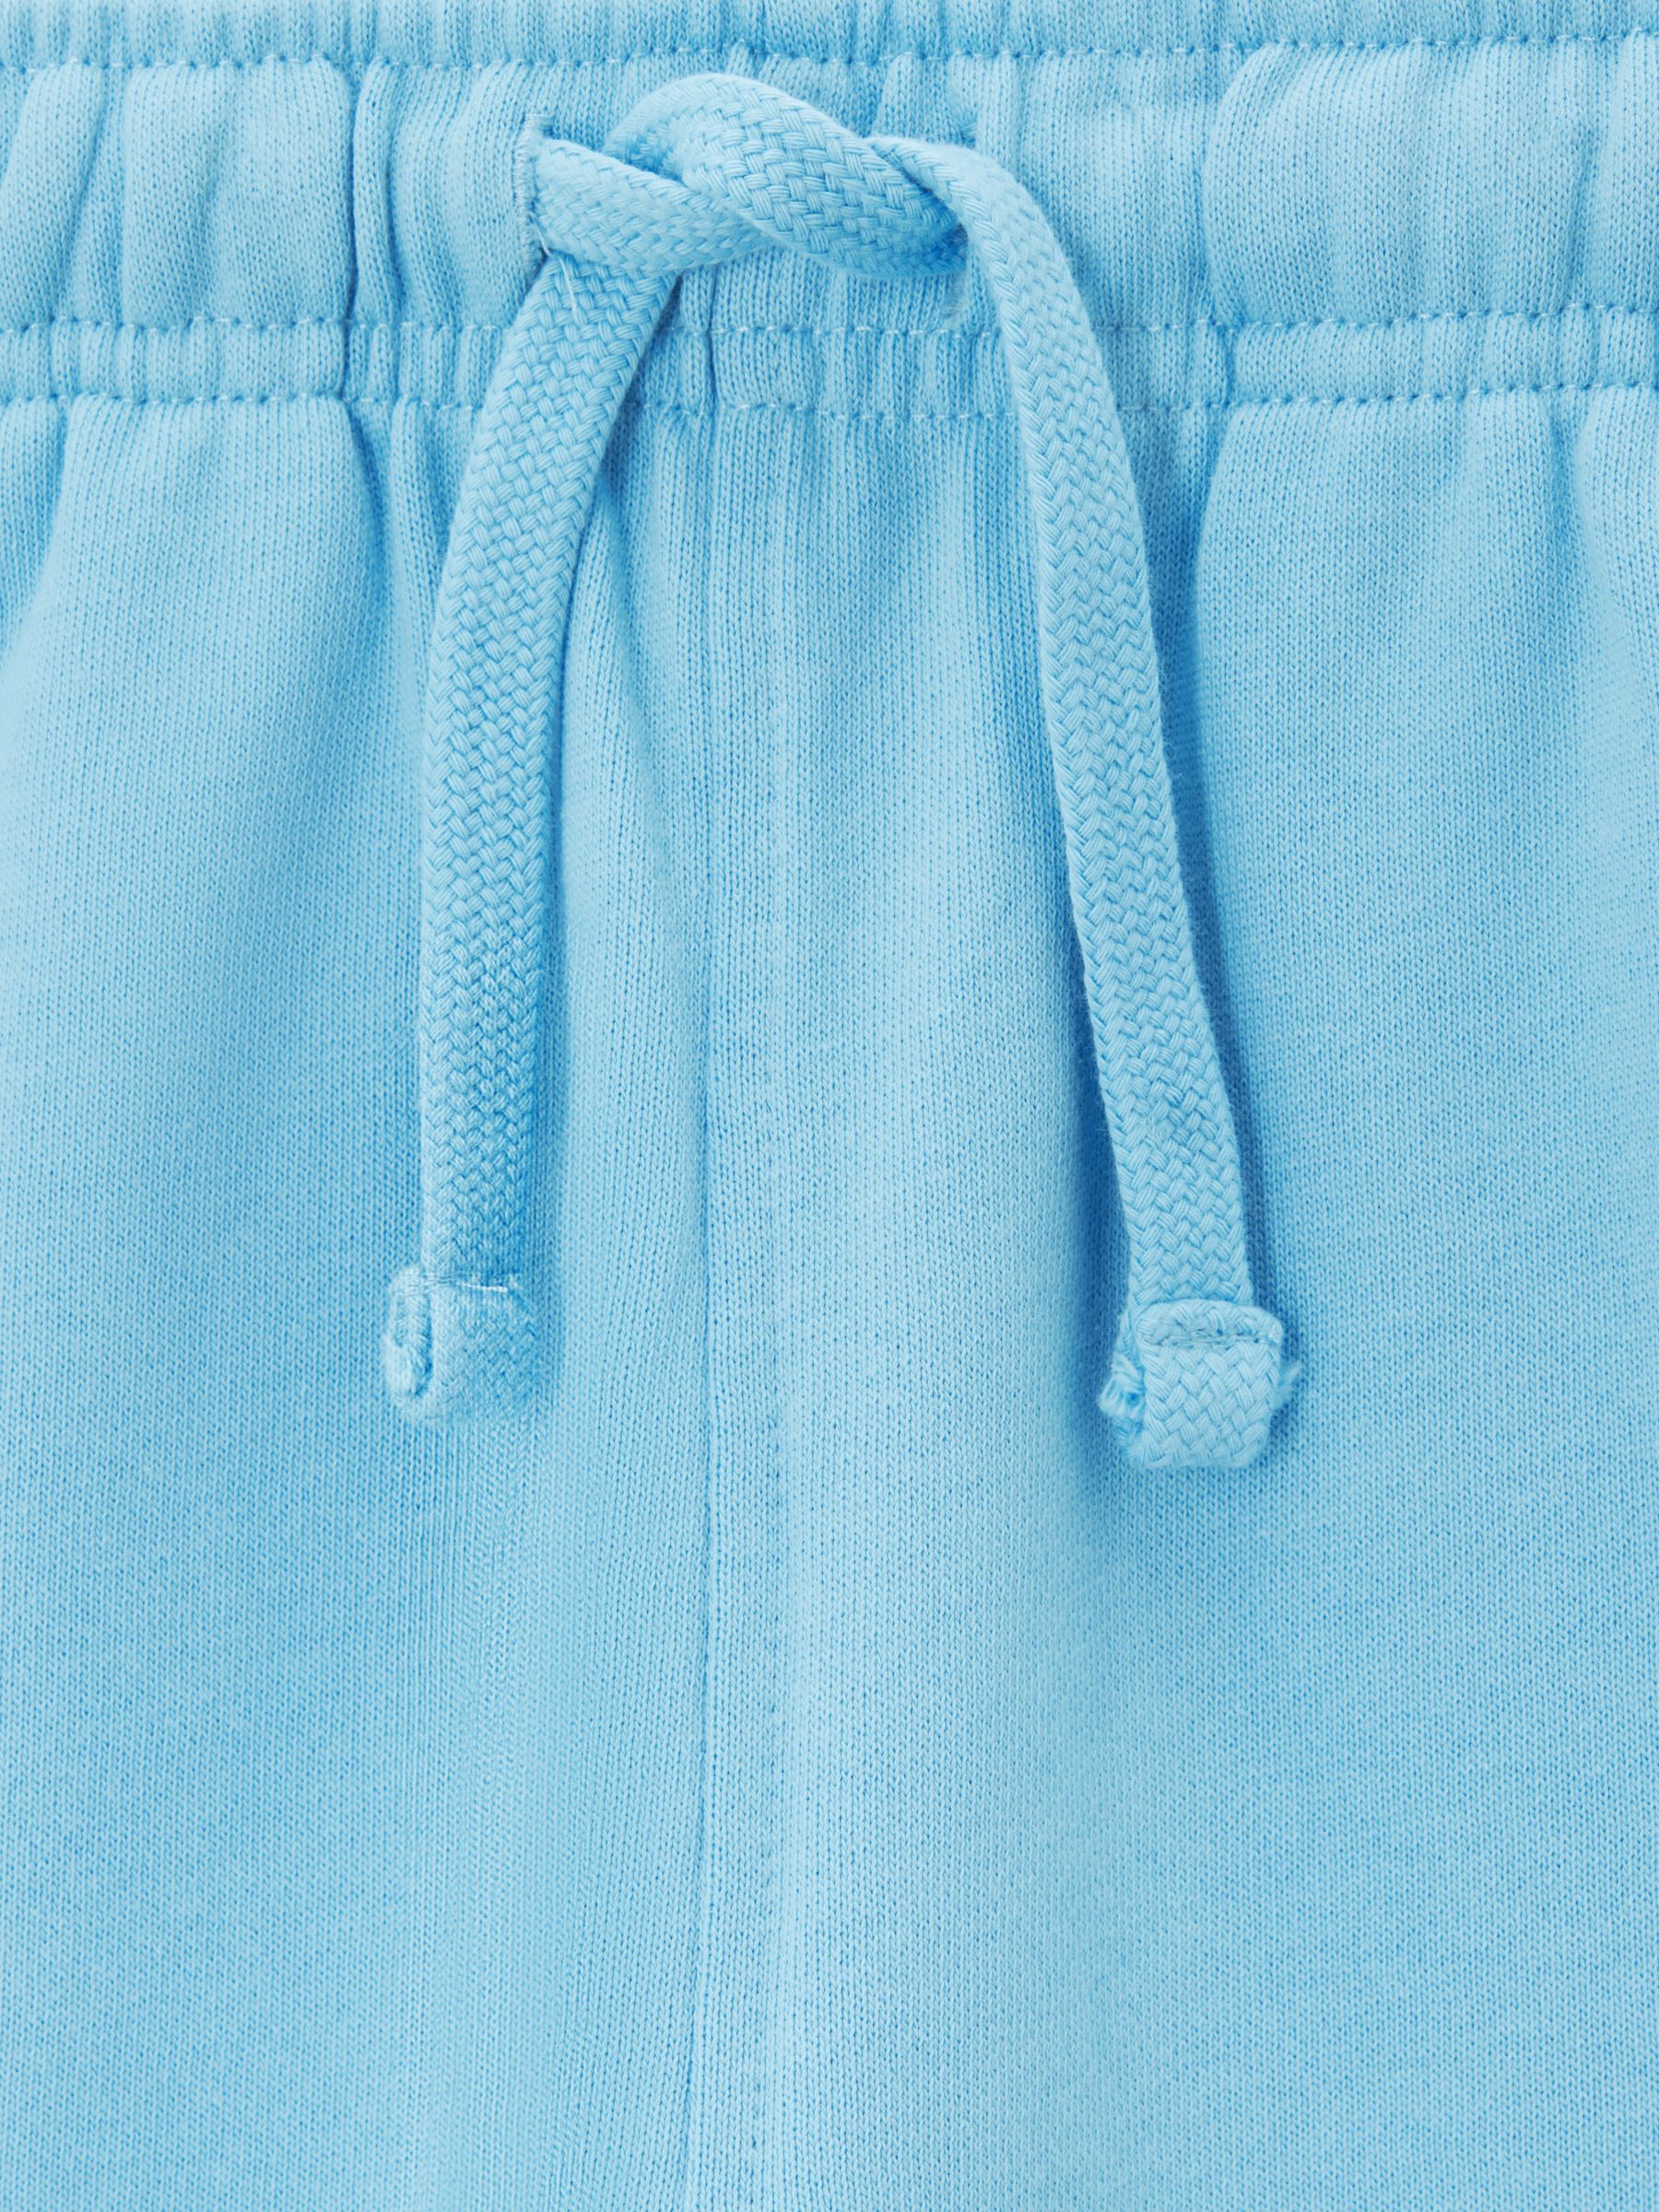 John Lewis ANYDAY Kids' Jersey Cotton Shorts, Air Blue, 2 years